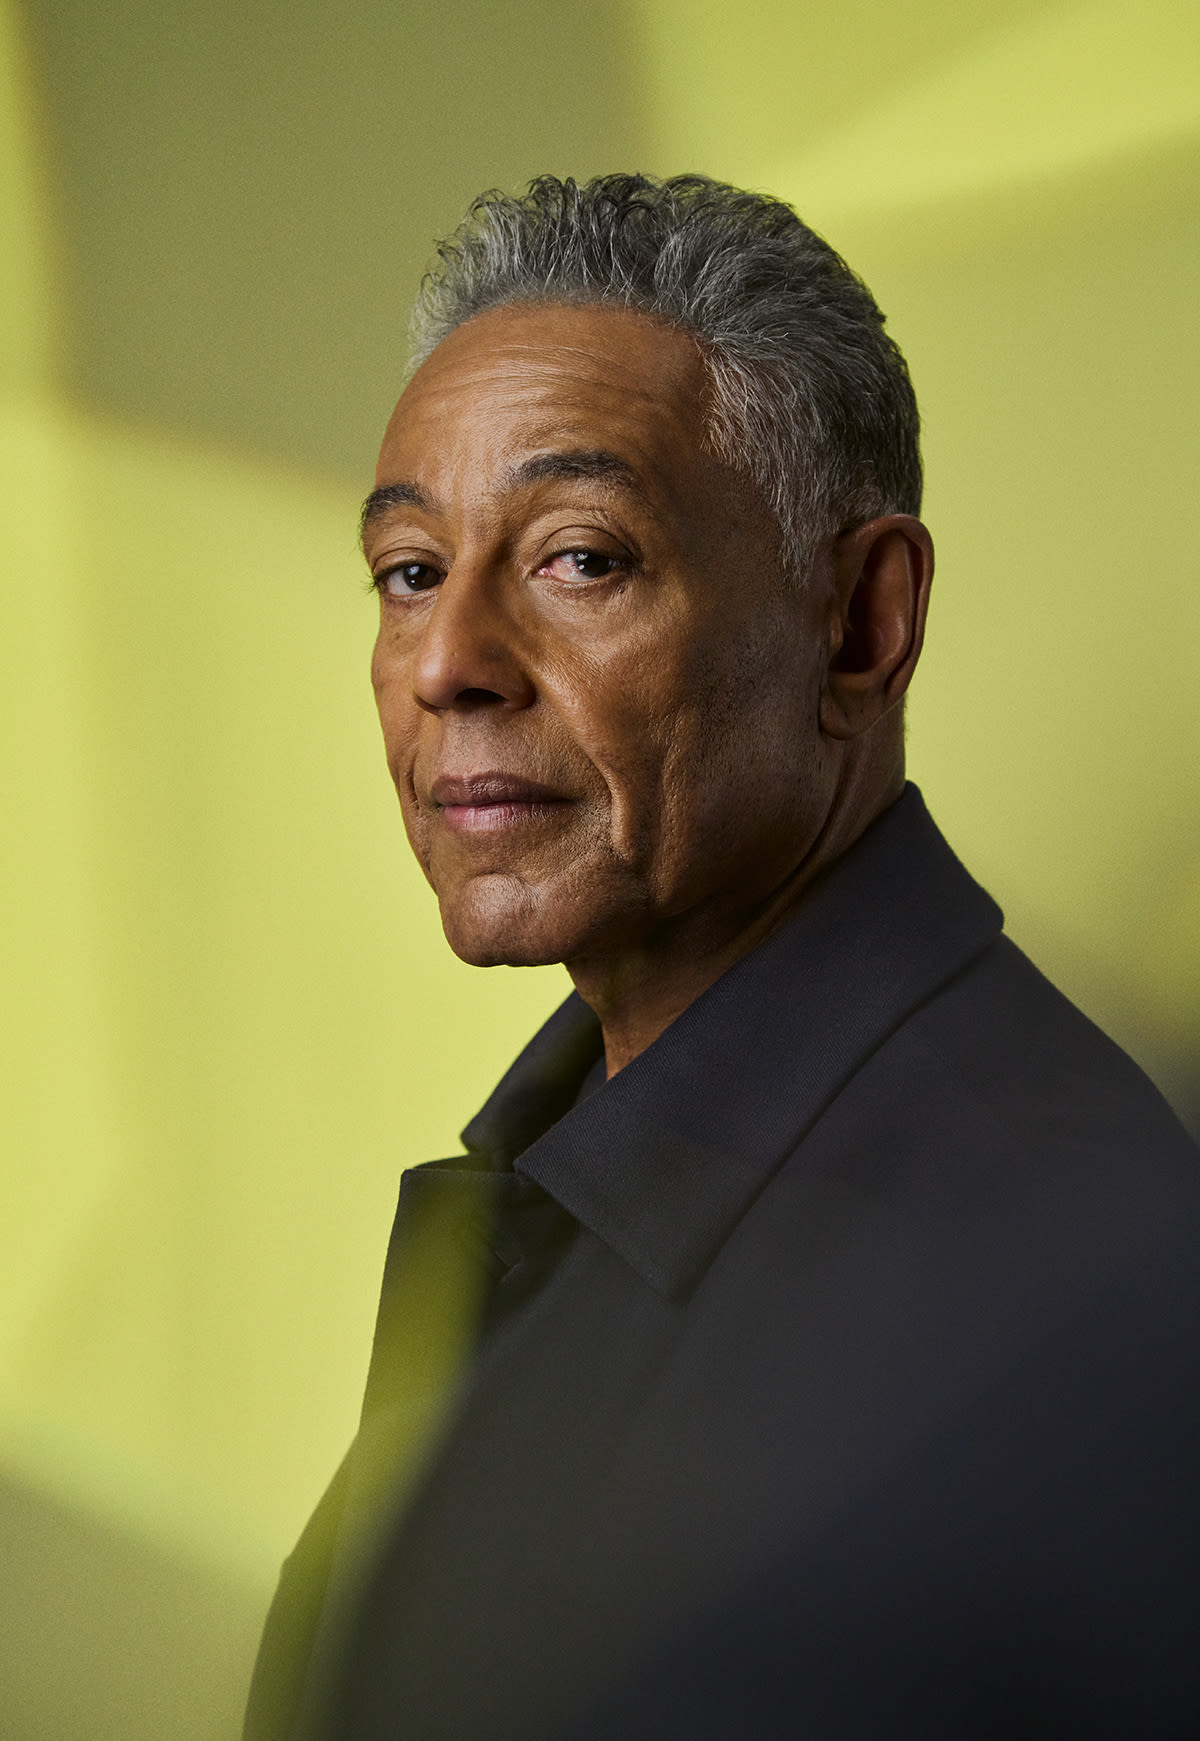 ‘Parish’ Star Giancarlo Esposito on Learning to Manage His Inner Gus Fring While Repairing Relationships With His Daughters